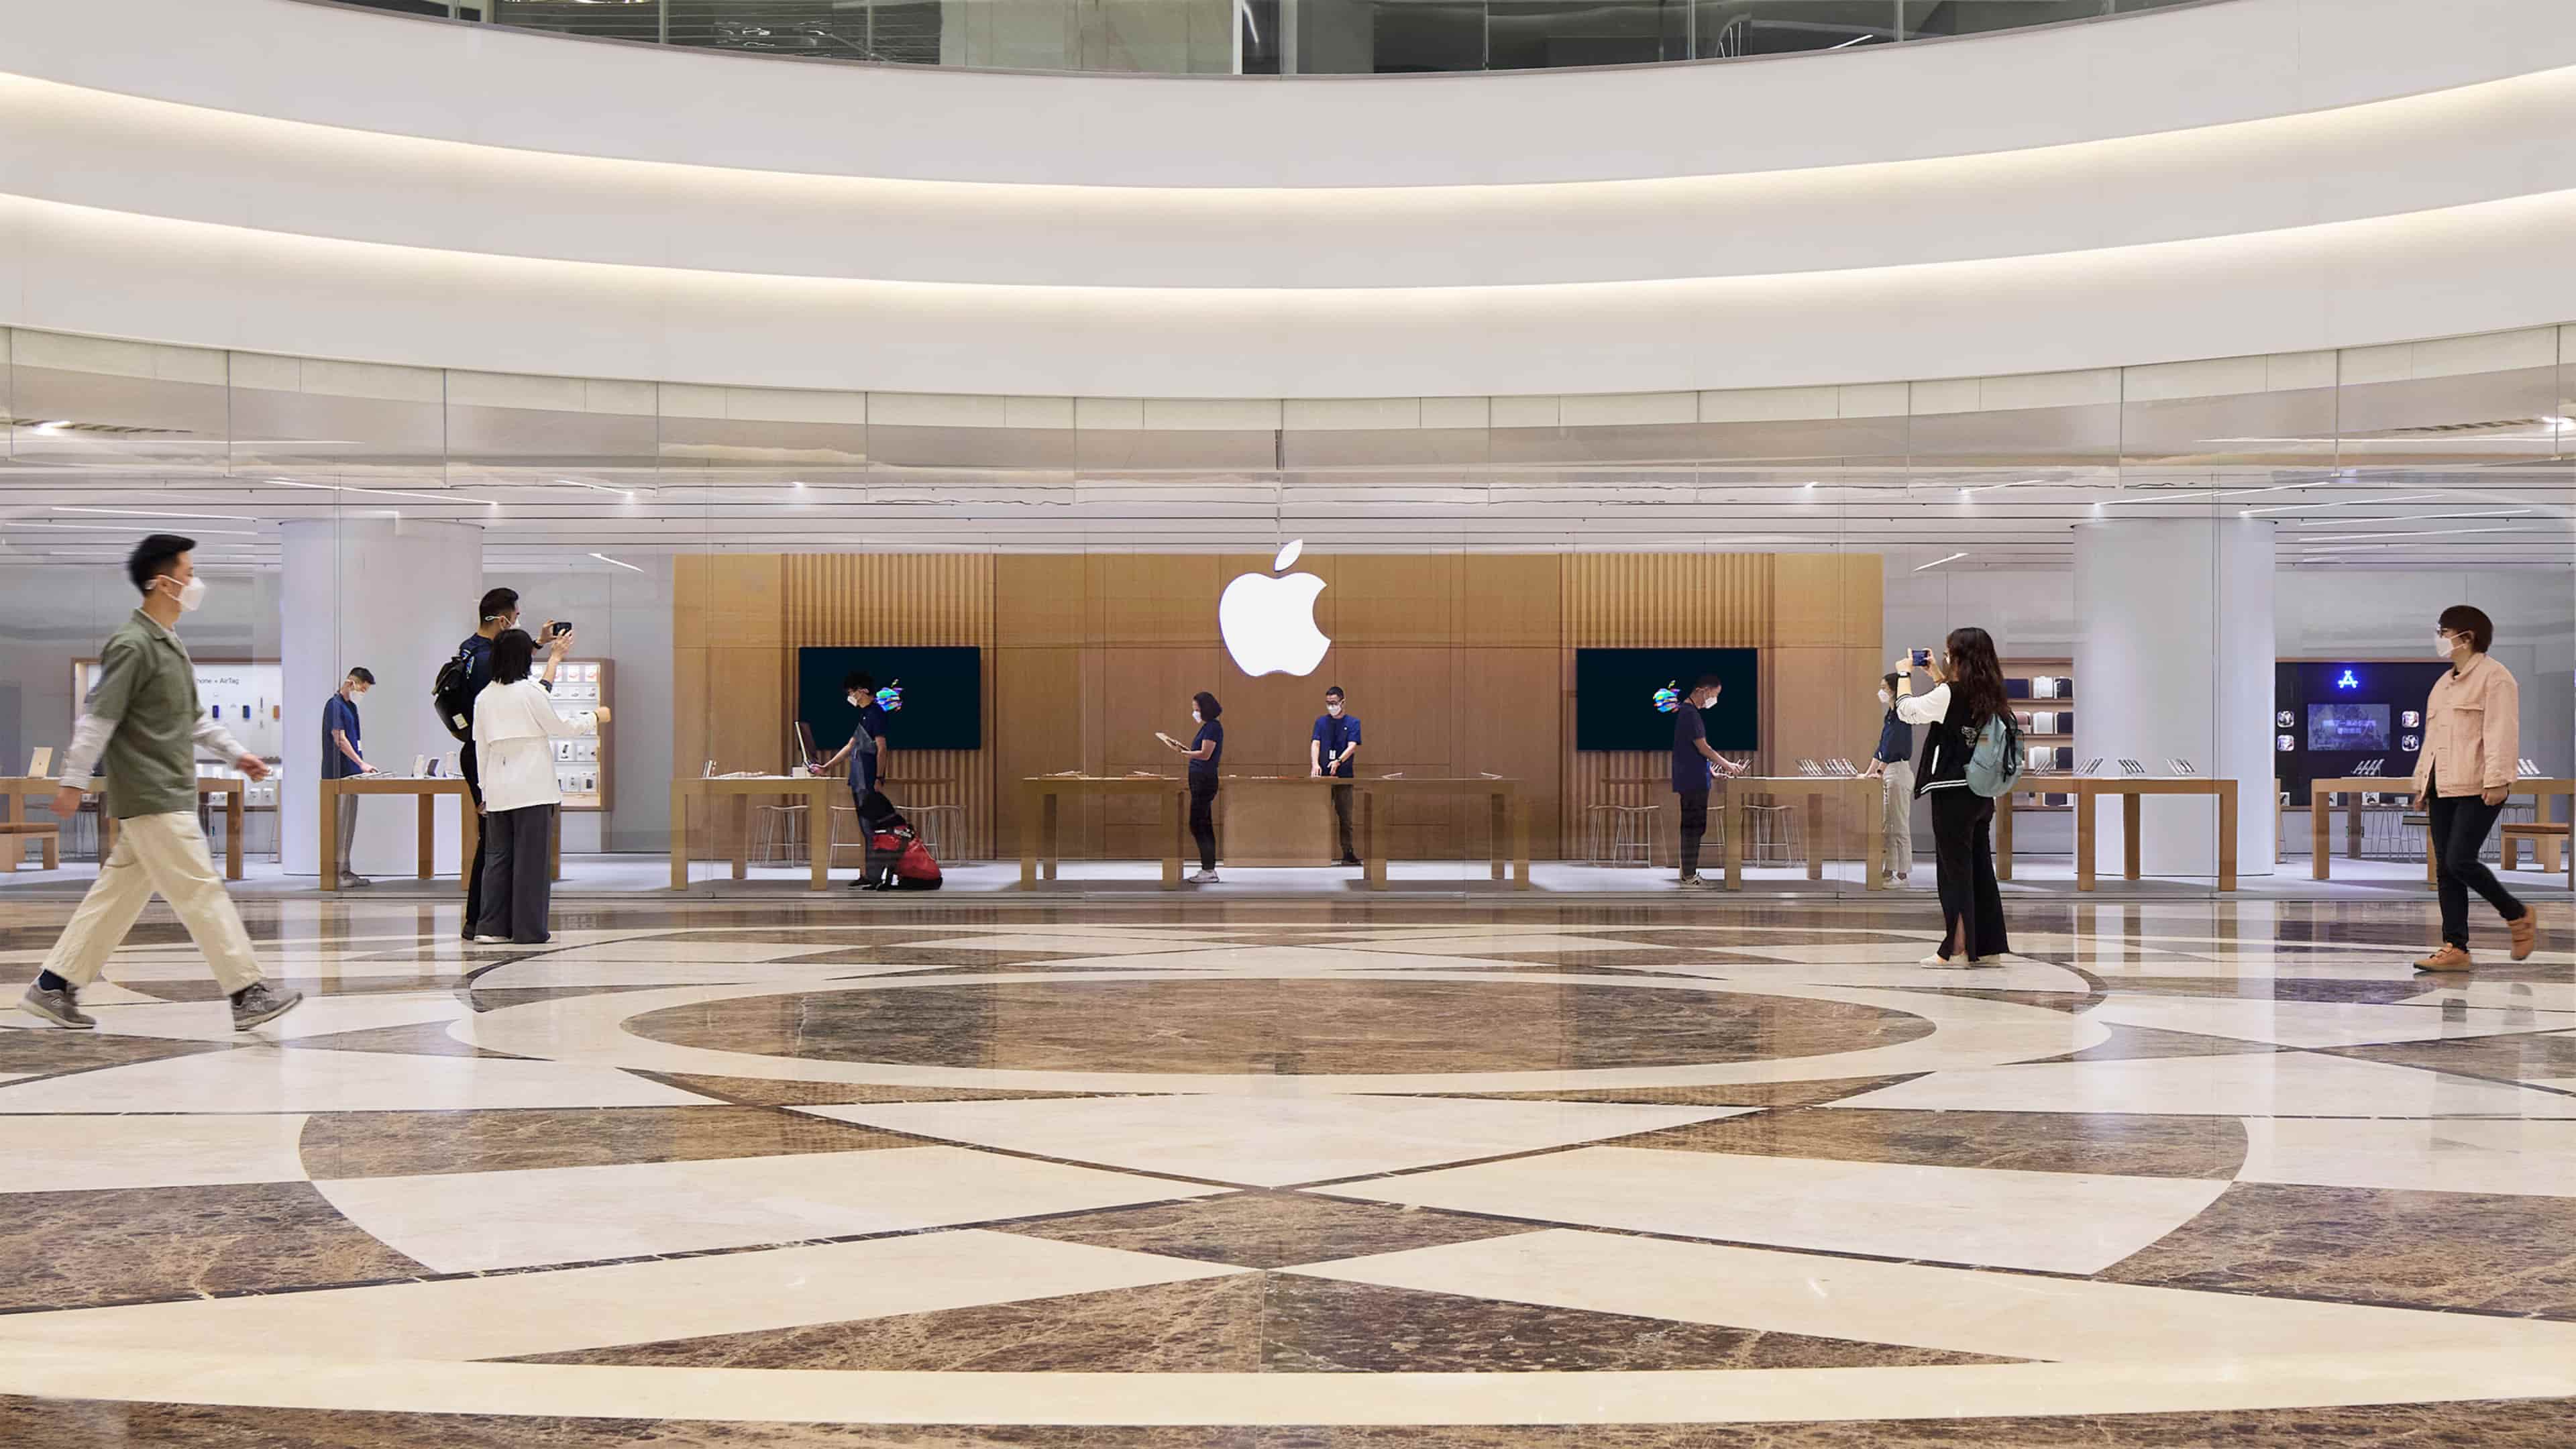 The interior of Apple Wuhan, the company's first store in China's Hubei Province and its 54th retail location in Greater China, is shown in this press photo from Apple, featuring granite floors and wood walls which make the interior brighter and transparent